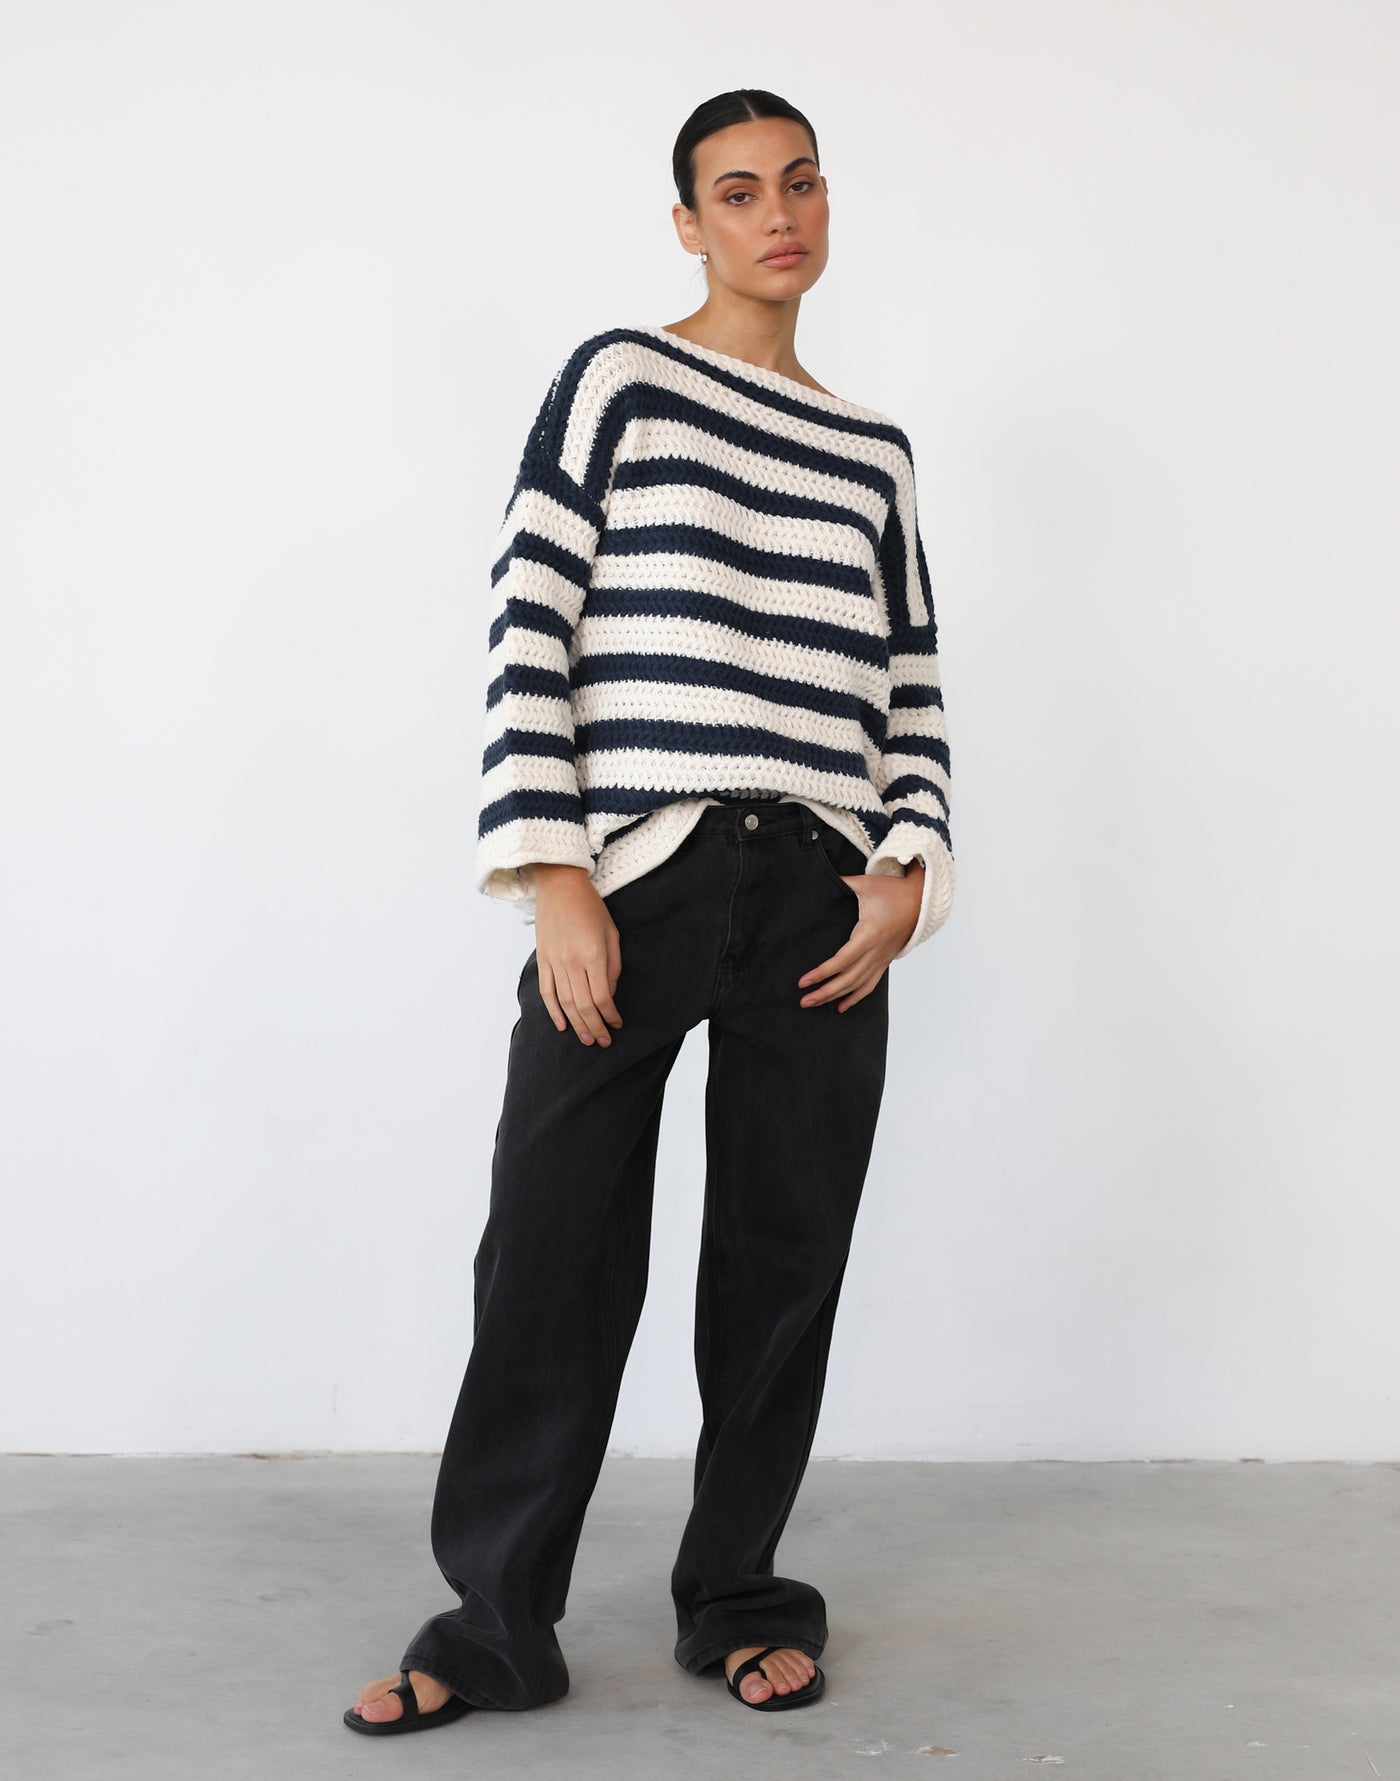 Everton Sweater (Navy/Cream) - Chunky Knit Oversized Striped Sweater - Women's Top - Charcoal Clothing